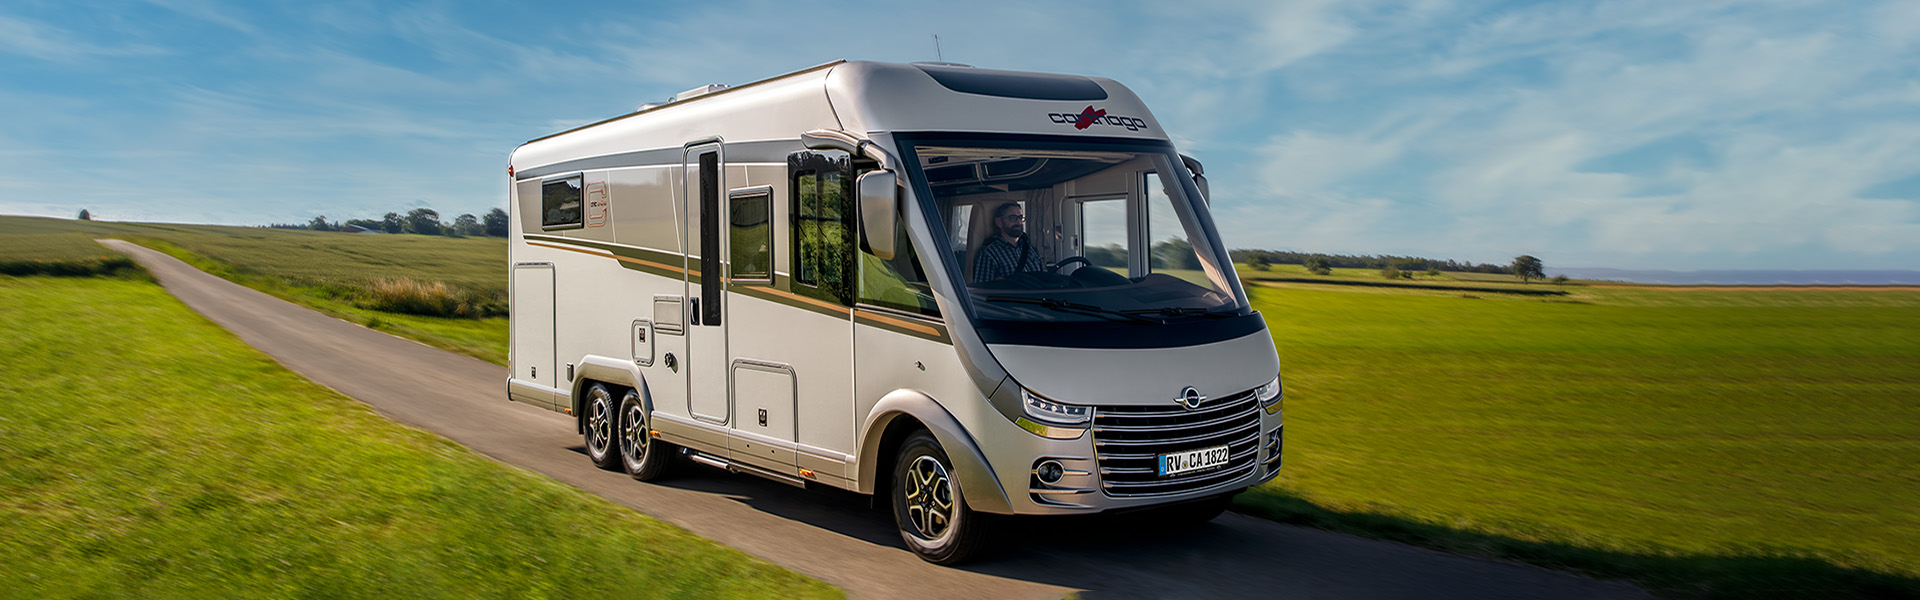 Carthago motorhomes are now in stock